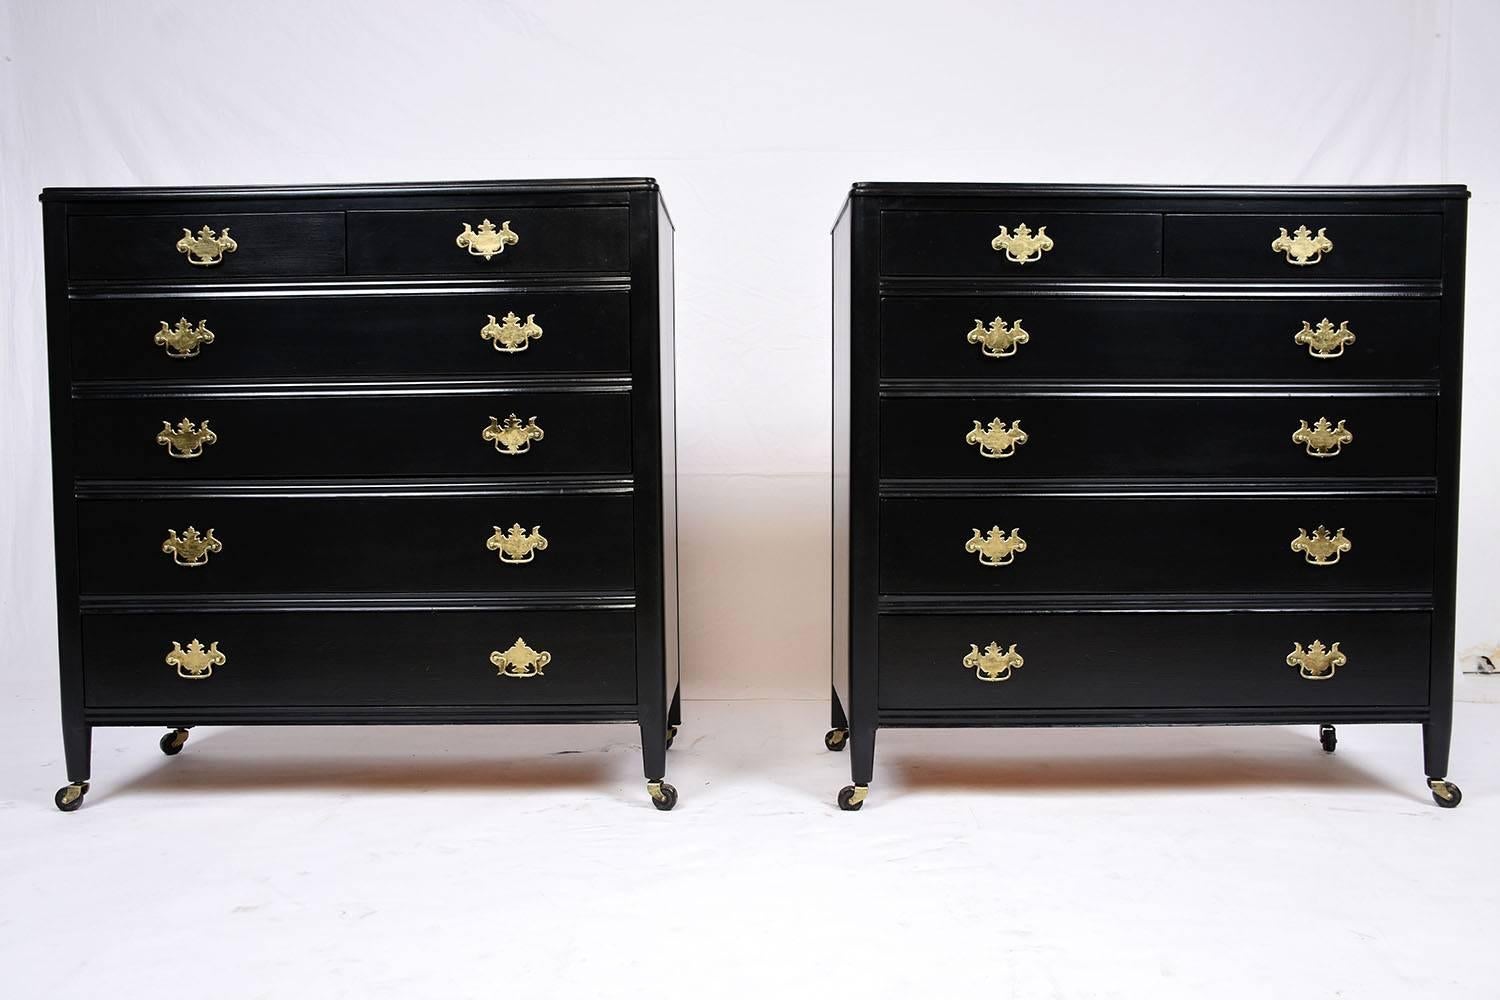 This 1920s antique Regency-style pair of chest of drawers is made from mahogany wood that has been finished in a rich black color stain. These elegant chest of drawers feature two side by side top drawers and four full size drawers below. The facade